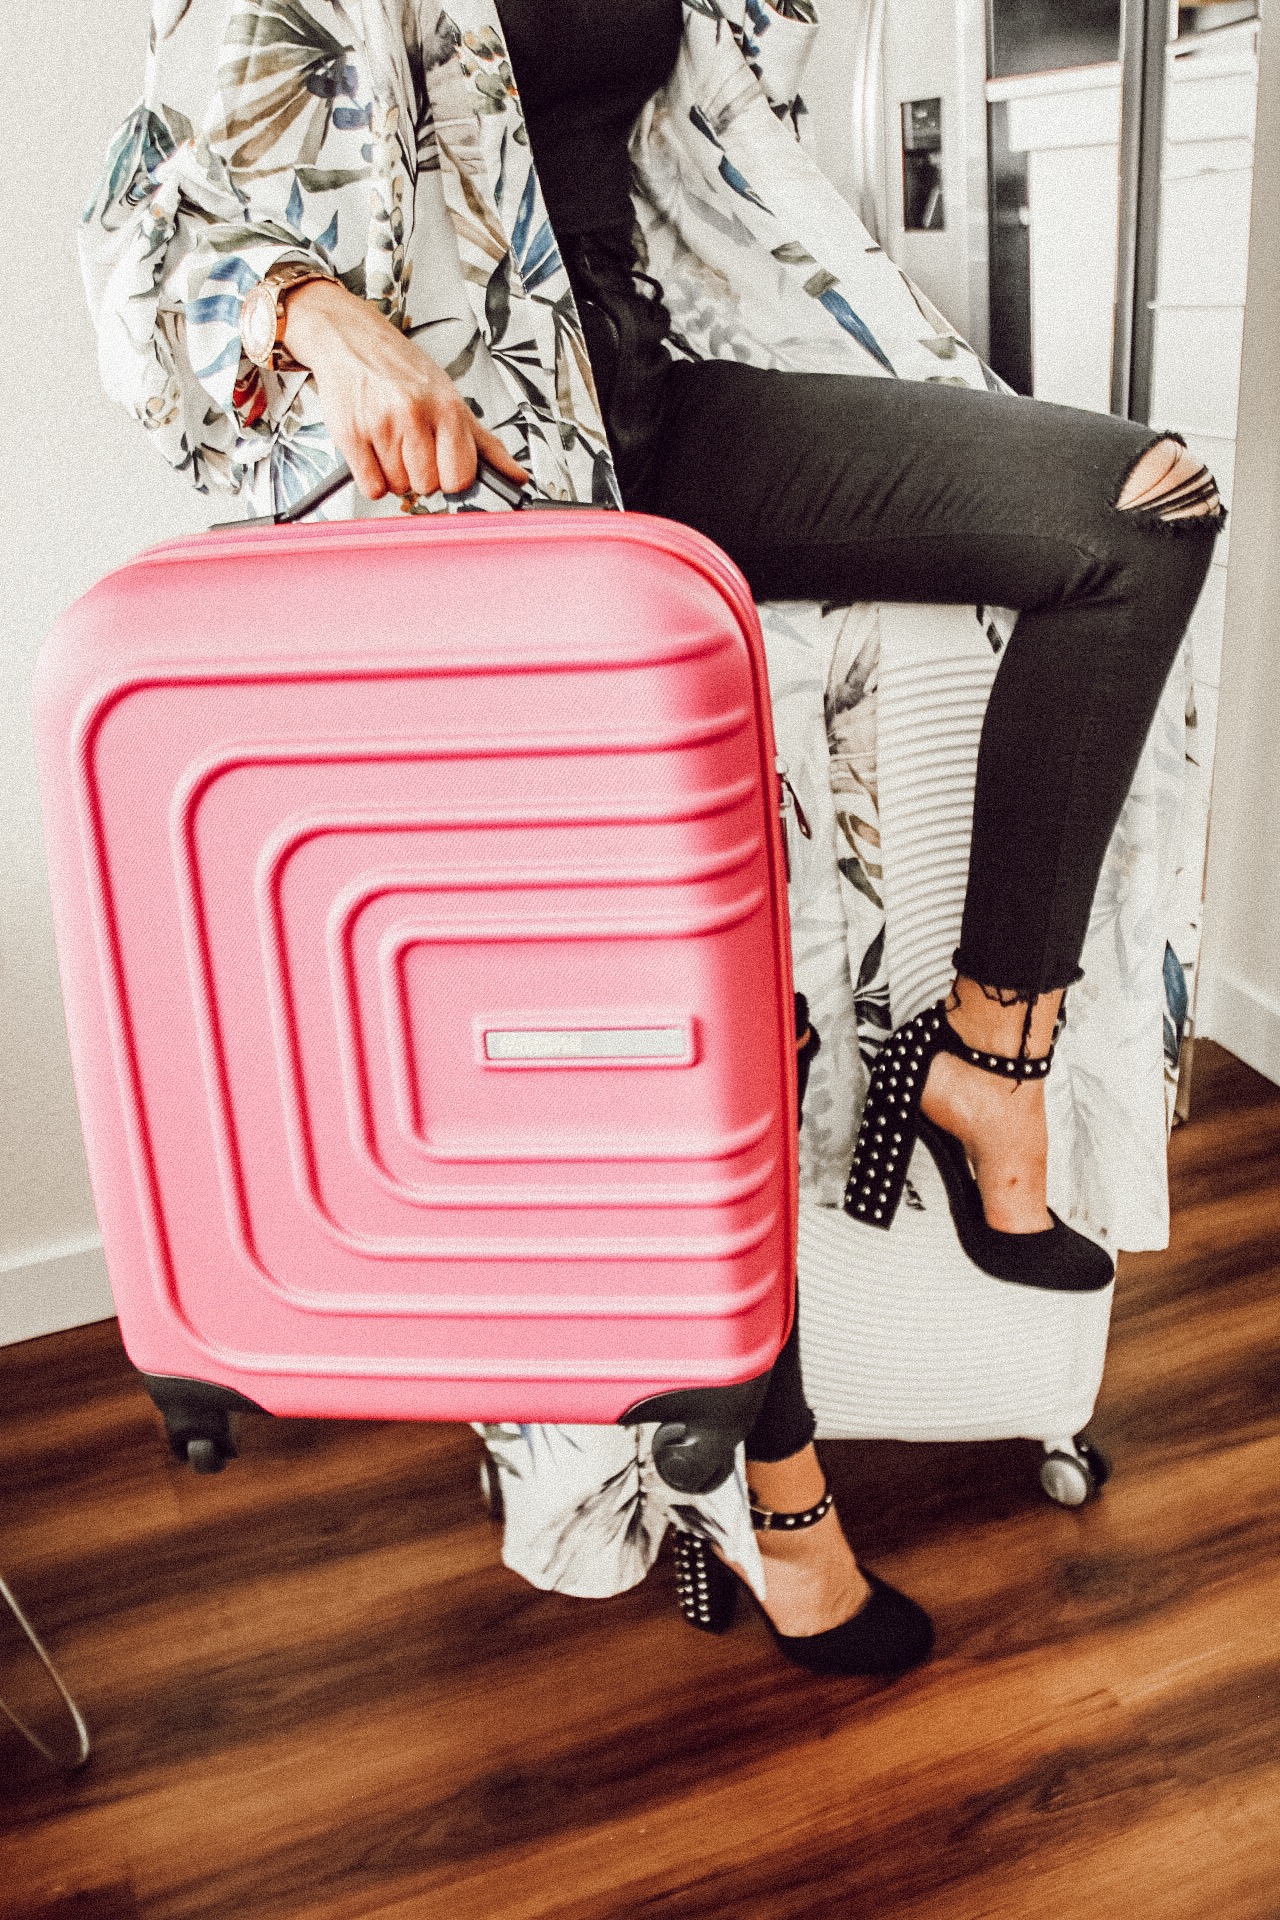 Alena Gidenko of modaprints.com shares tips on how to stay organized and pack for a trip with American Tourist suitcase